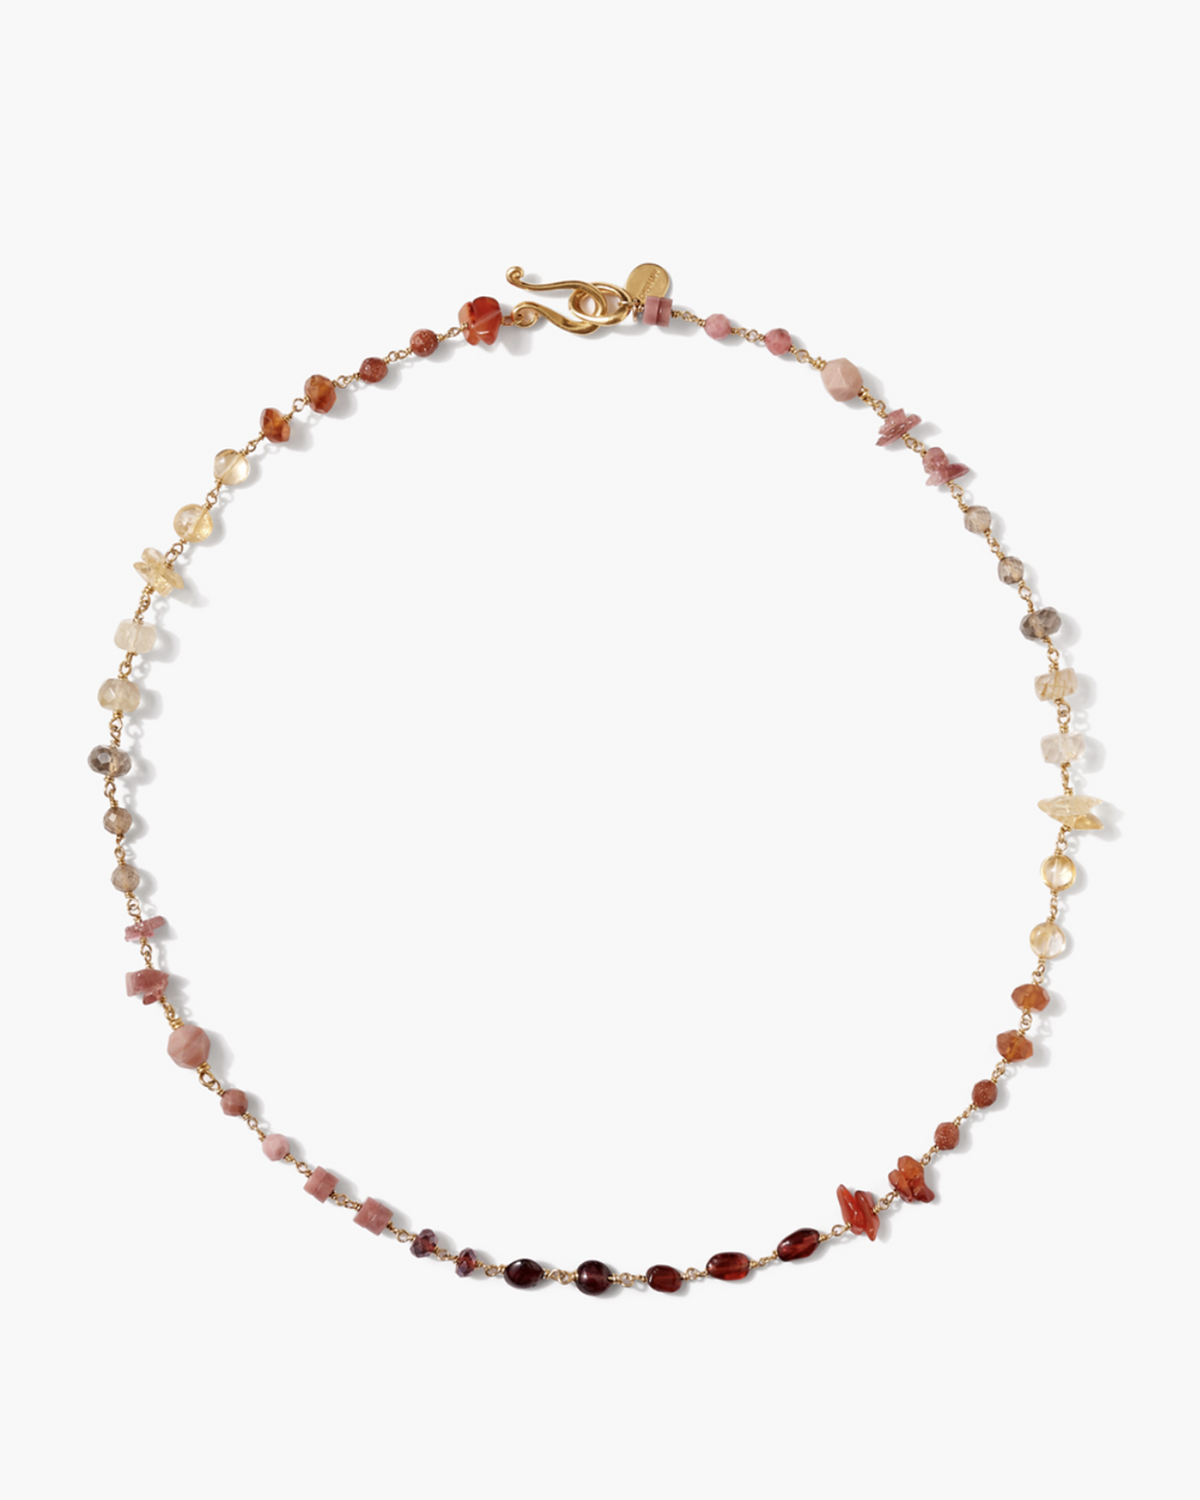 Daphne Beaded Necklace in Citrine Mix